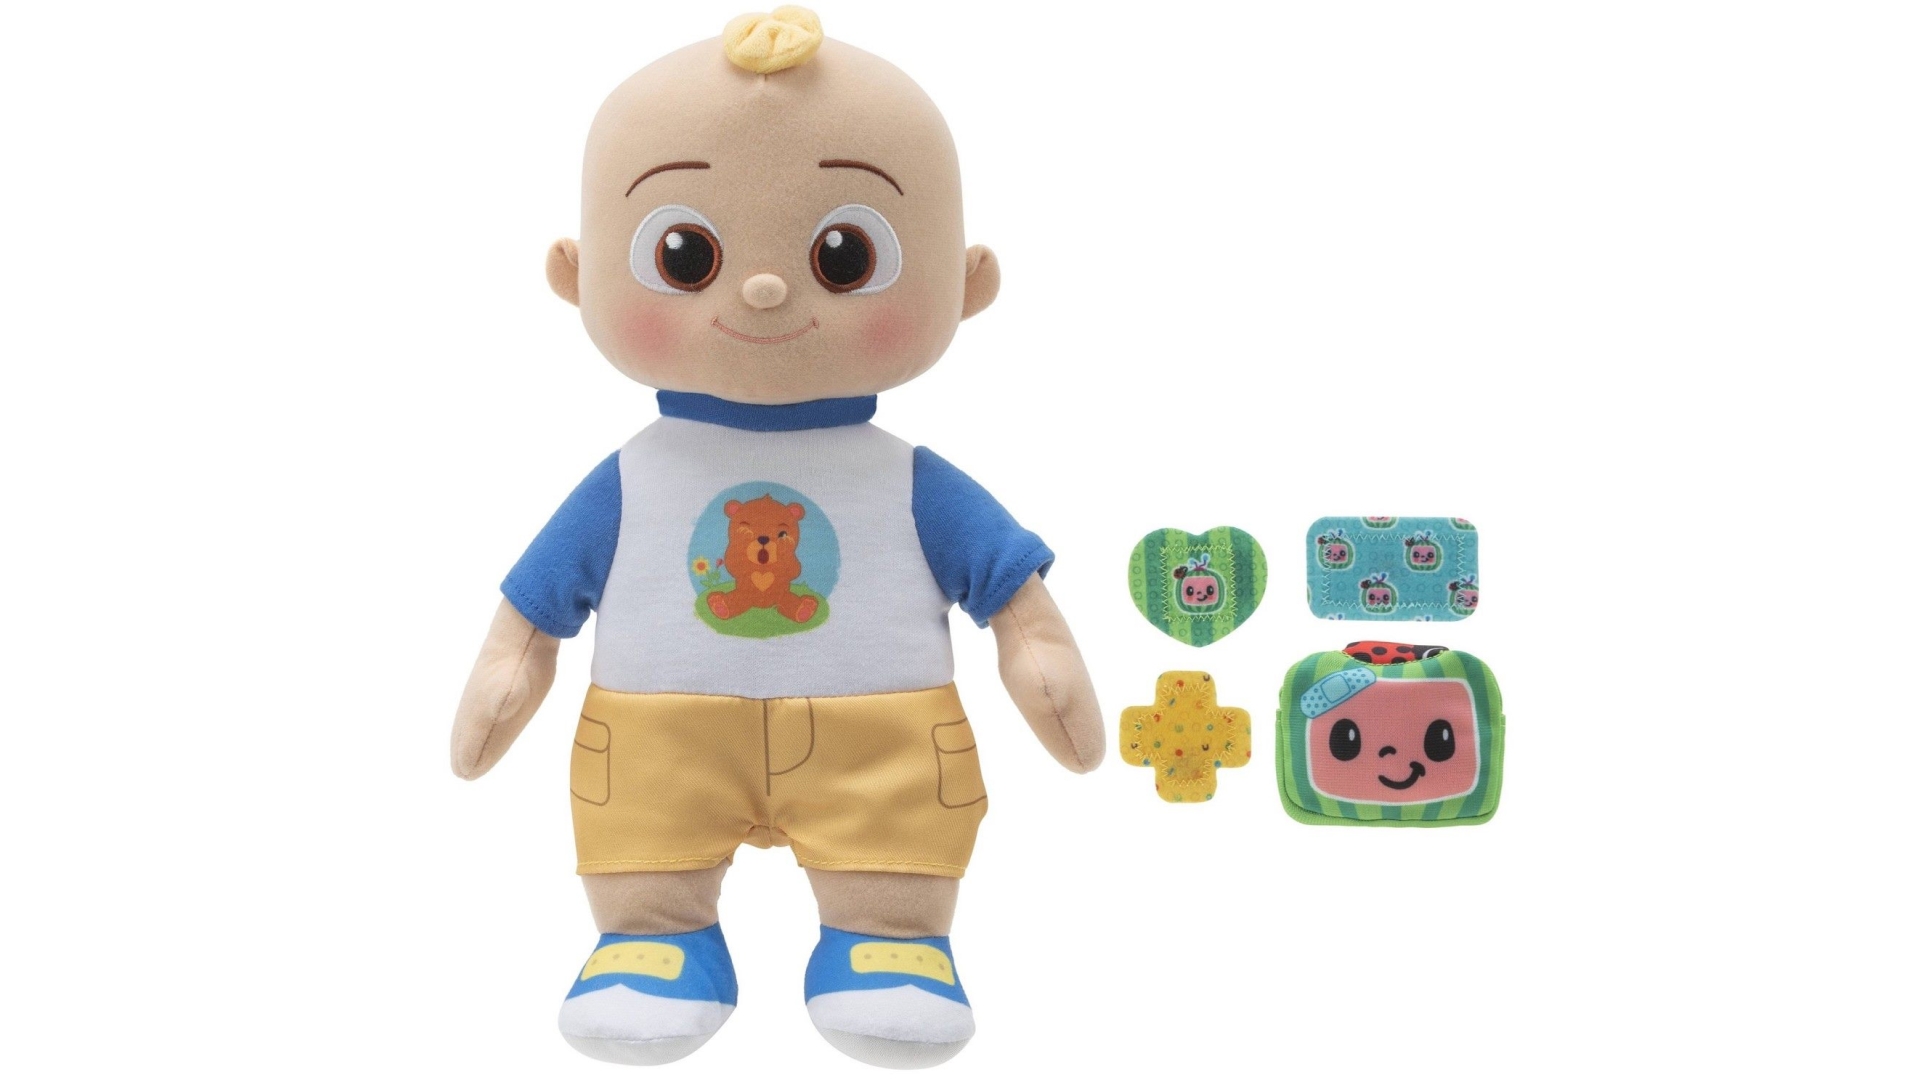 CoComelon Boo Boo JJ Plush, an interactive doll with lights and bandages for imaginative healing play.